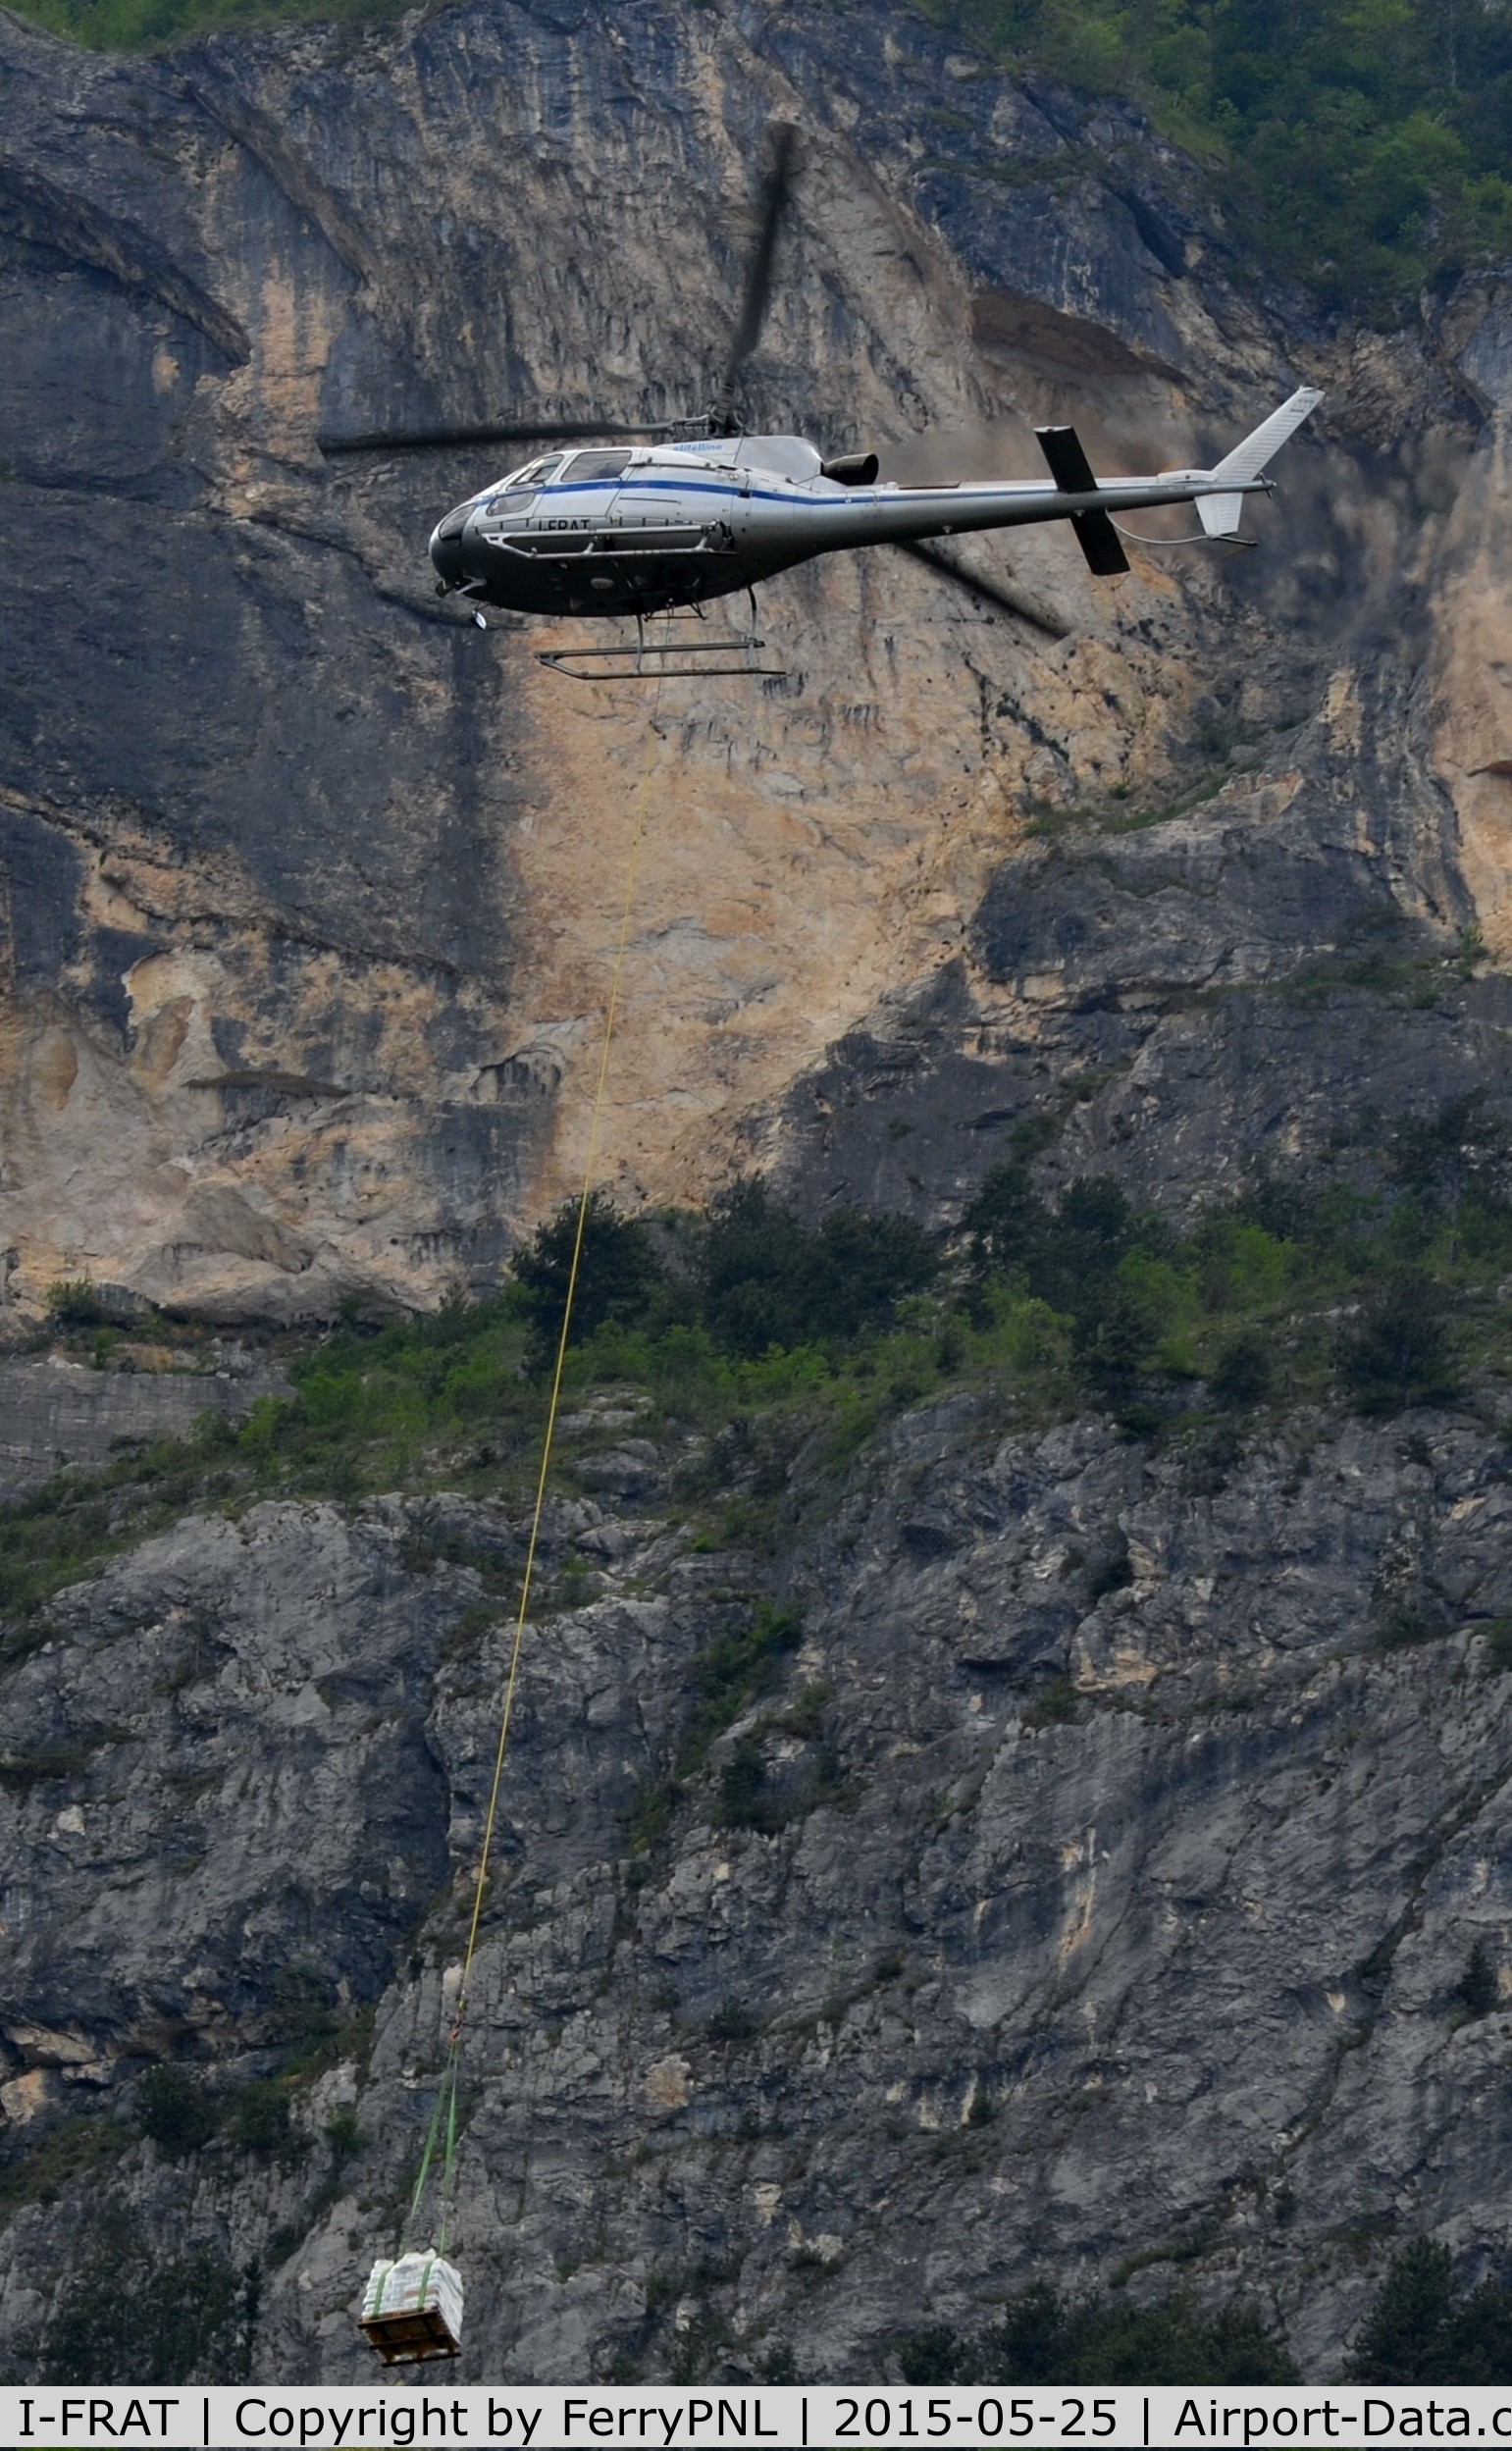 I-FRAT, Eurocopter AS-350B-3 Ecureuil Ecureuil C/N 4720, Elitellina AS350 with its load close to the mountain.